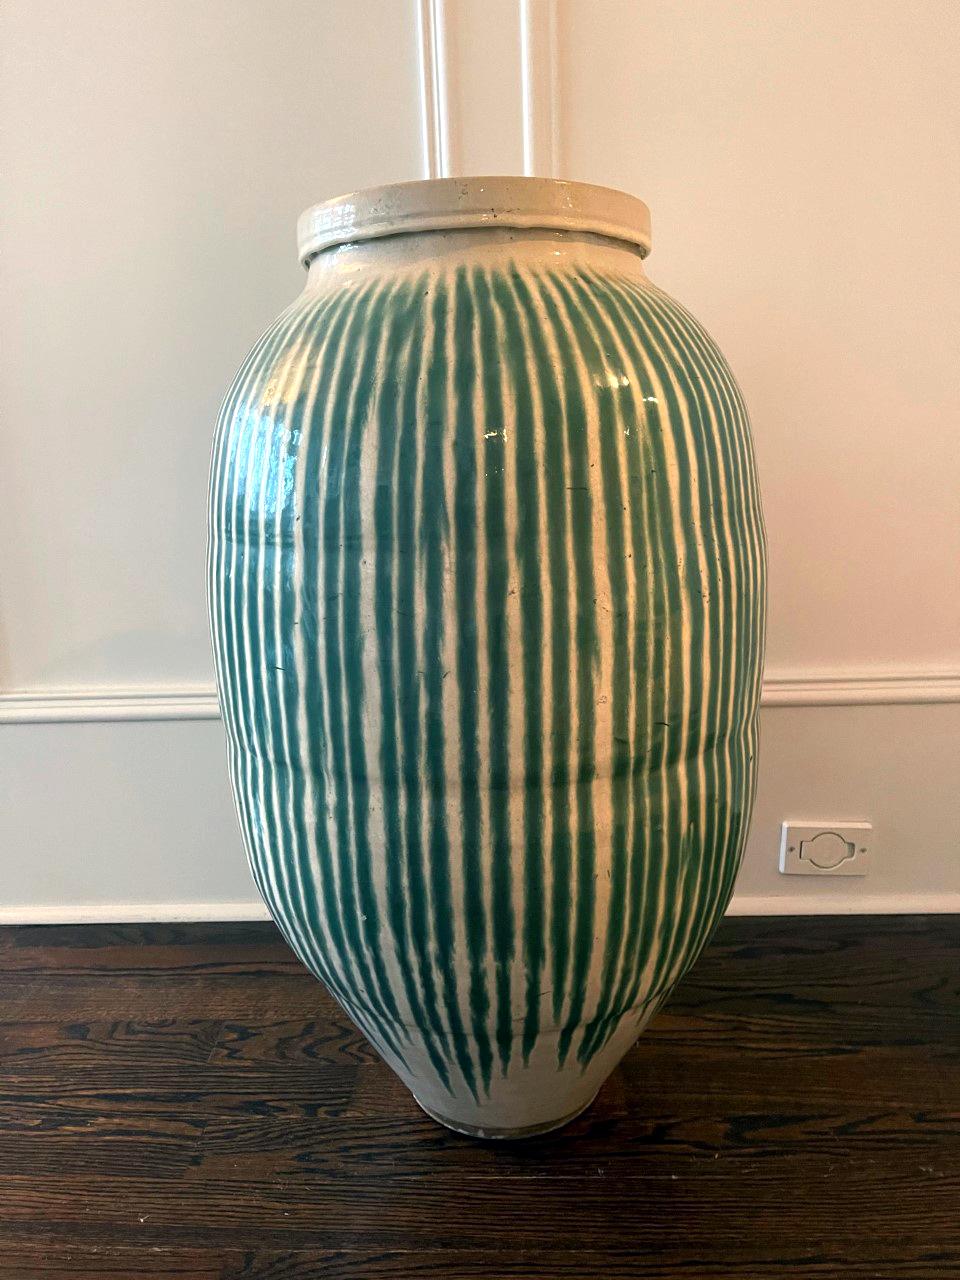 A massive Japanese storage jar (Tsubo) from Meiji Period (1868-1912). Heavily potted with slightly irregular ovoid shape, this type of jars were made to store tea leaves in the shop. Due to the hand-coiled construction process, these jars tend to be